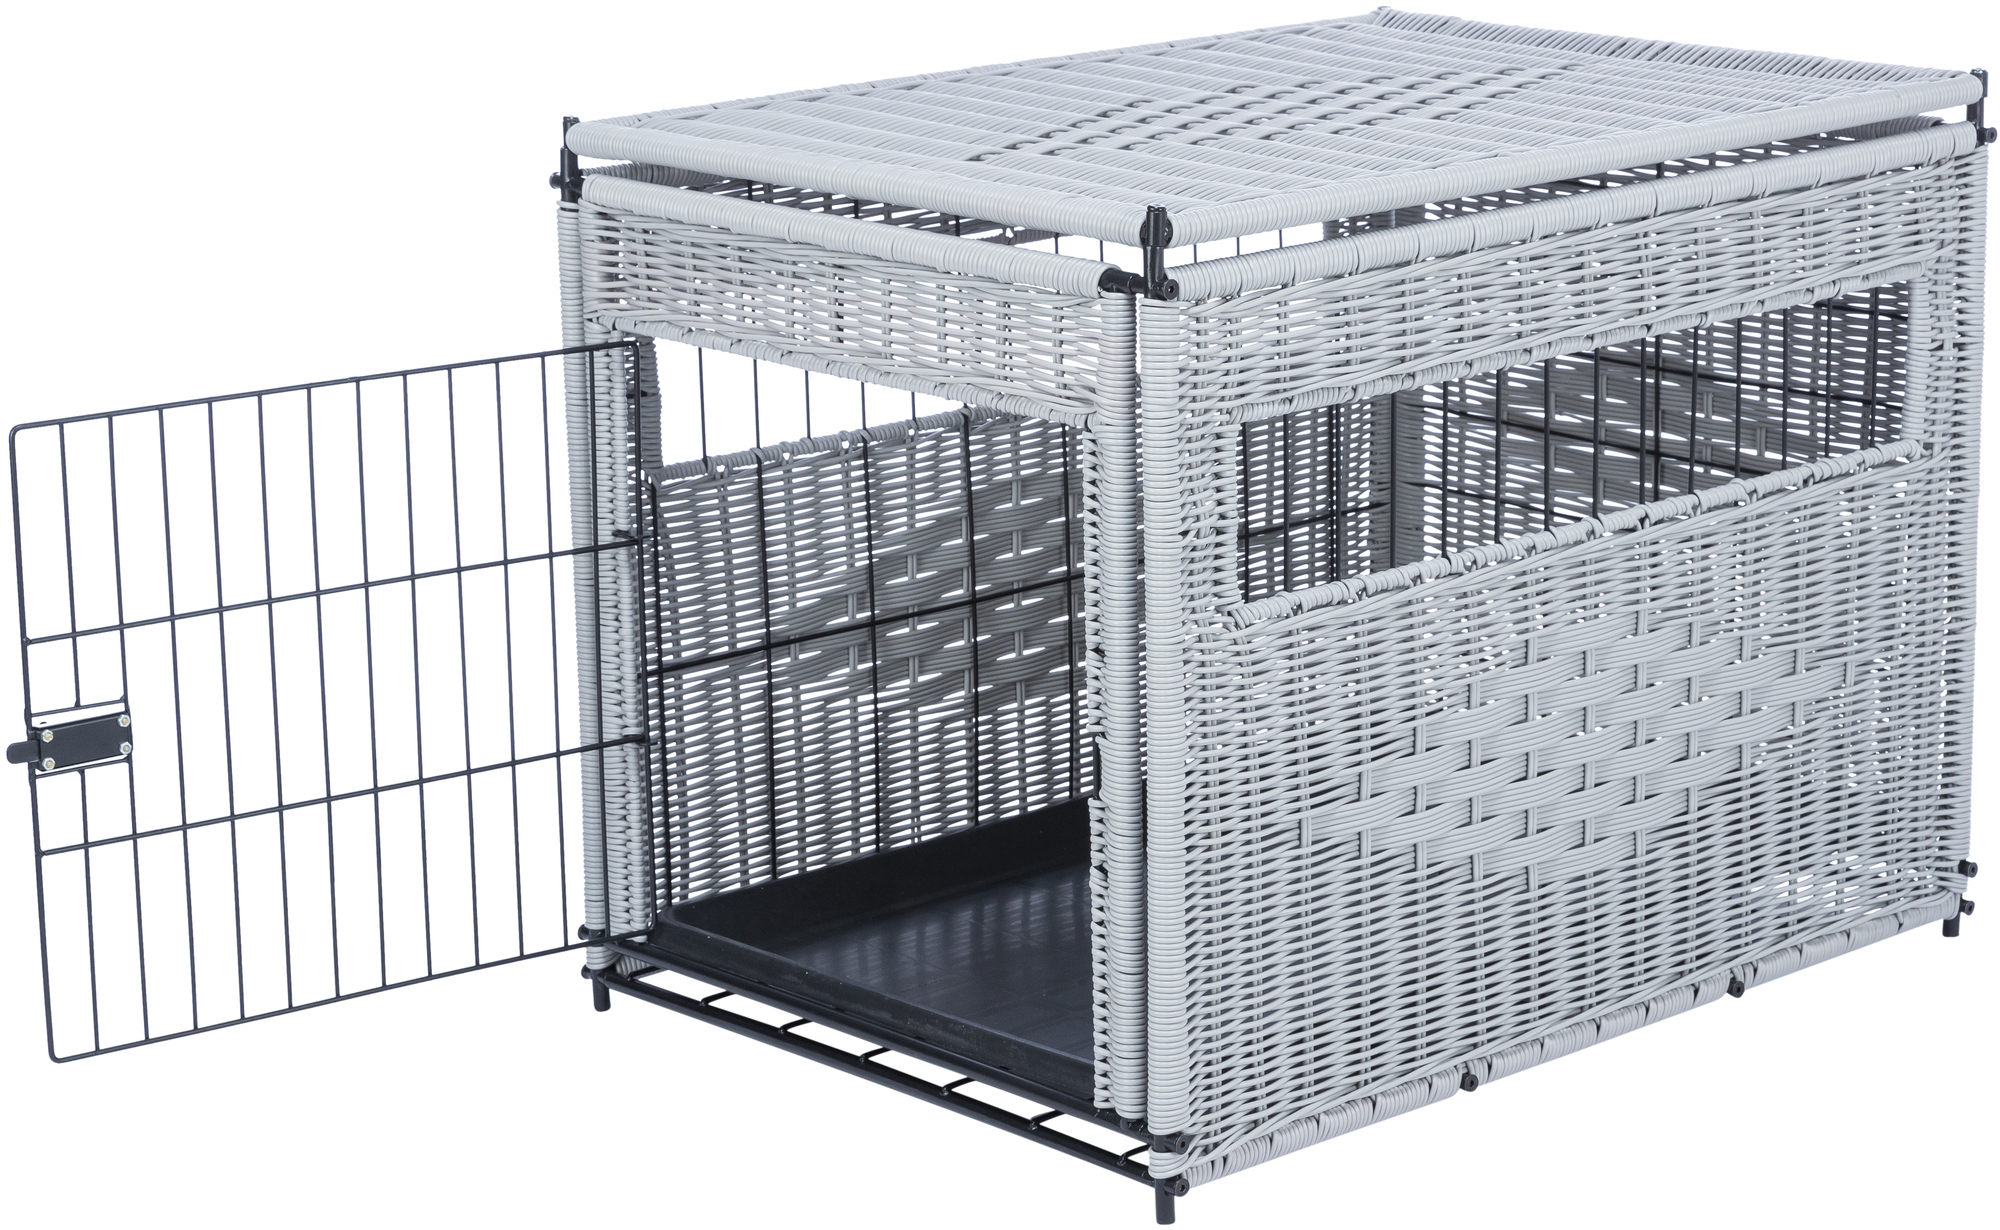 Home Kennel in polyrattan